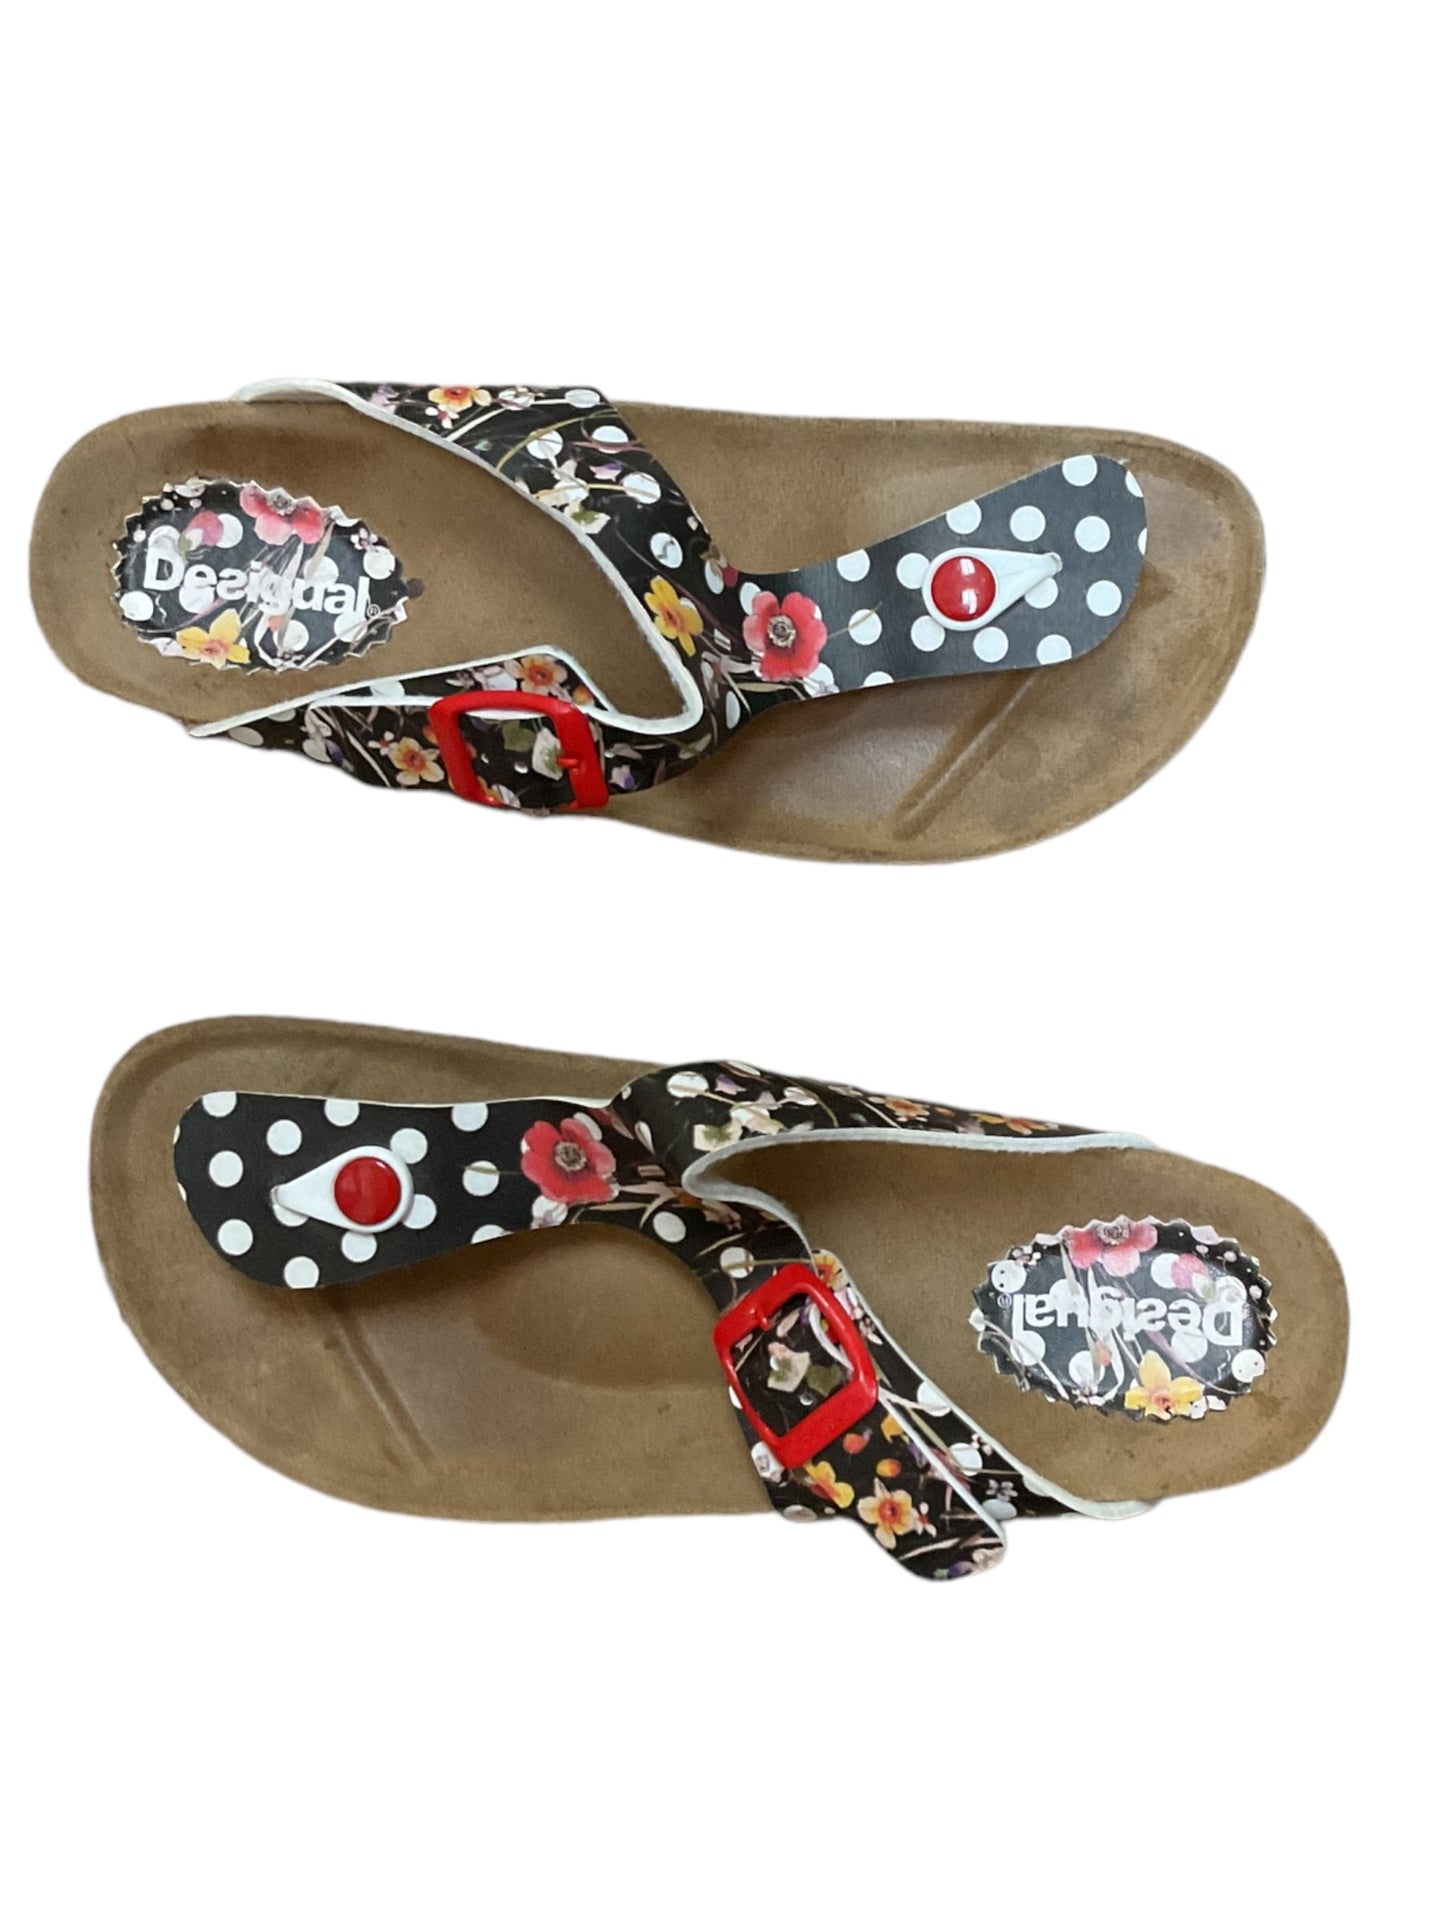 Sandals Flats By Desigual  Size: 7.5